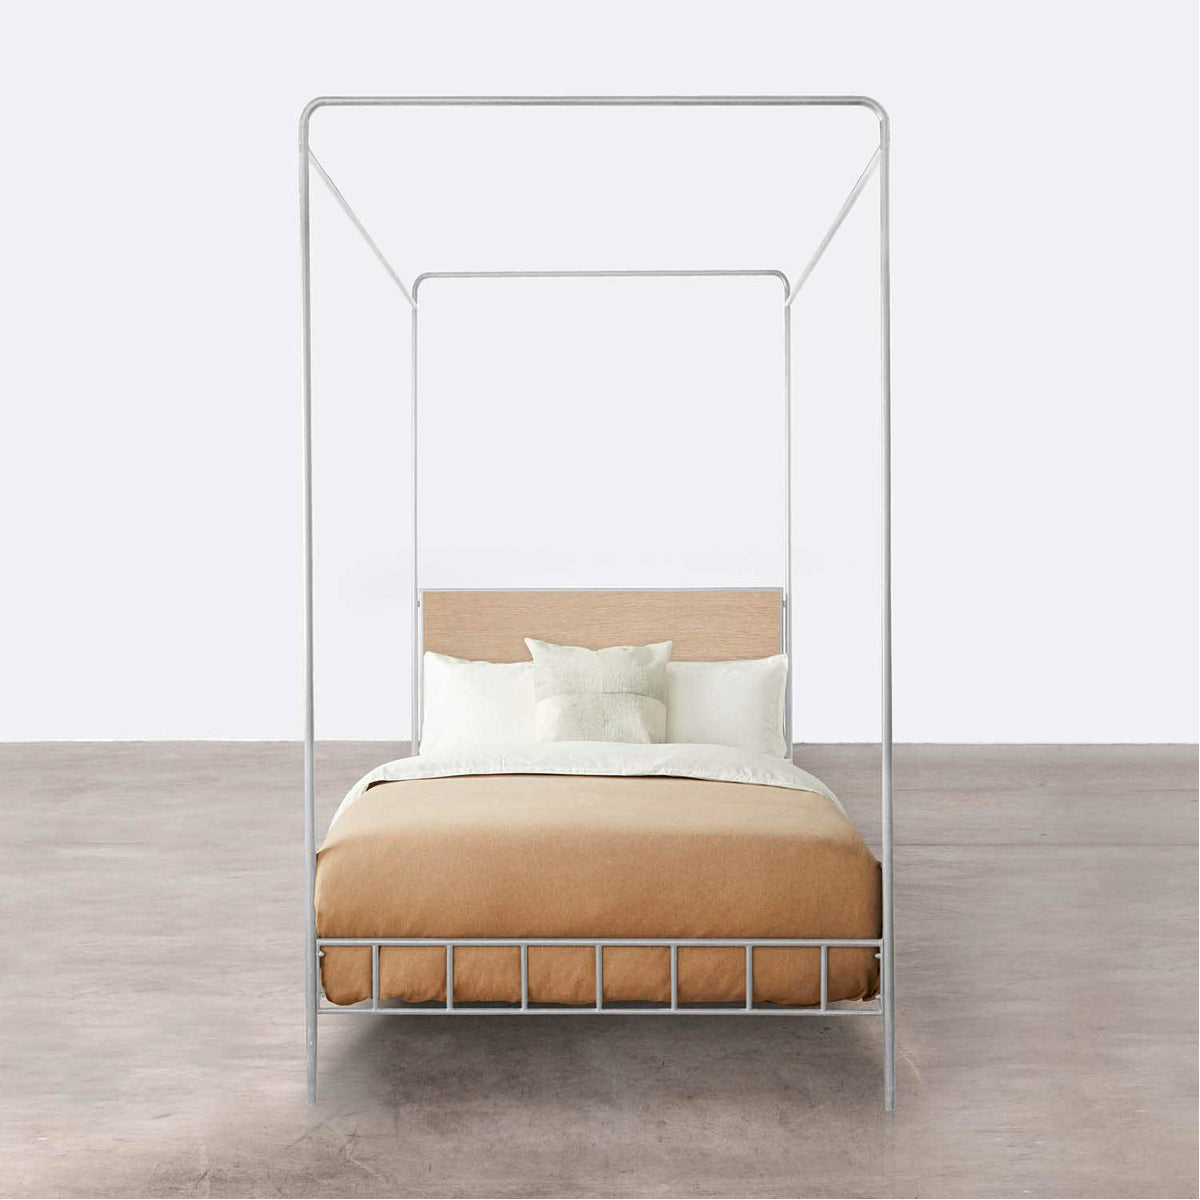 Made Goods Laken Iron Canopy Bed in Clyde Fabric